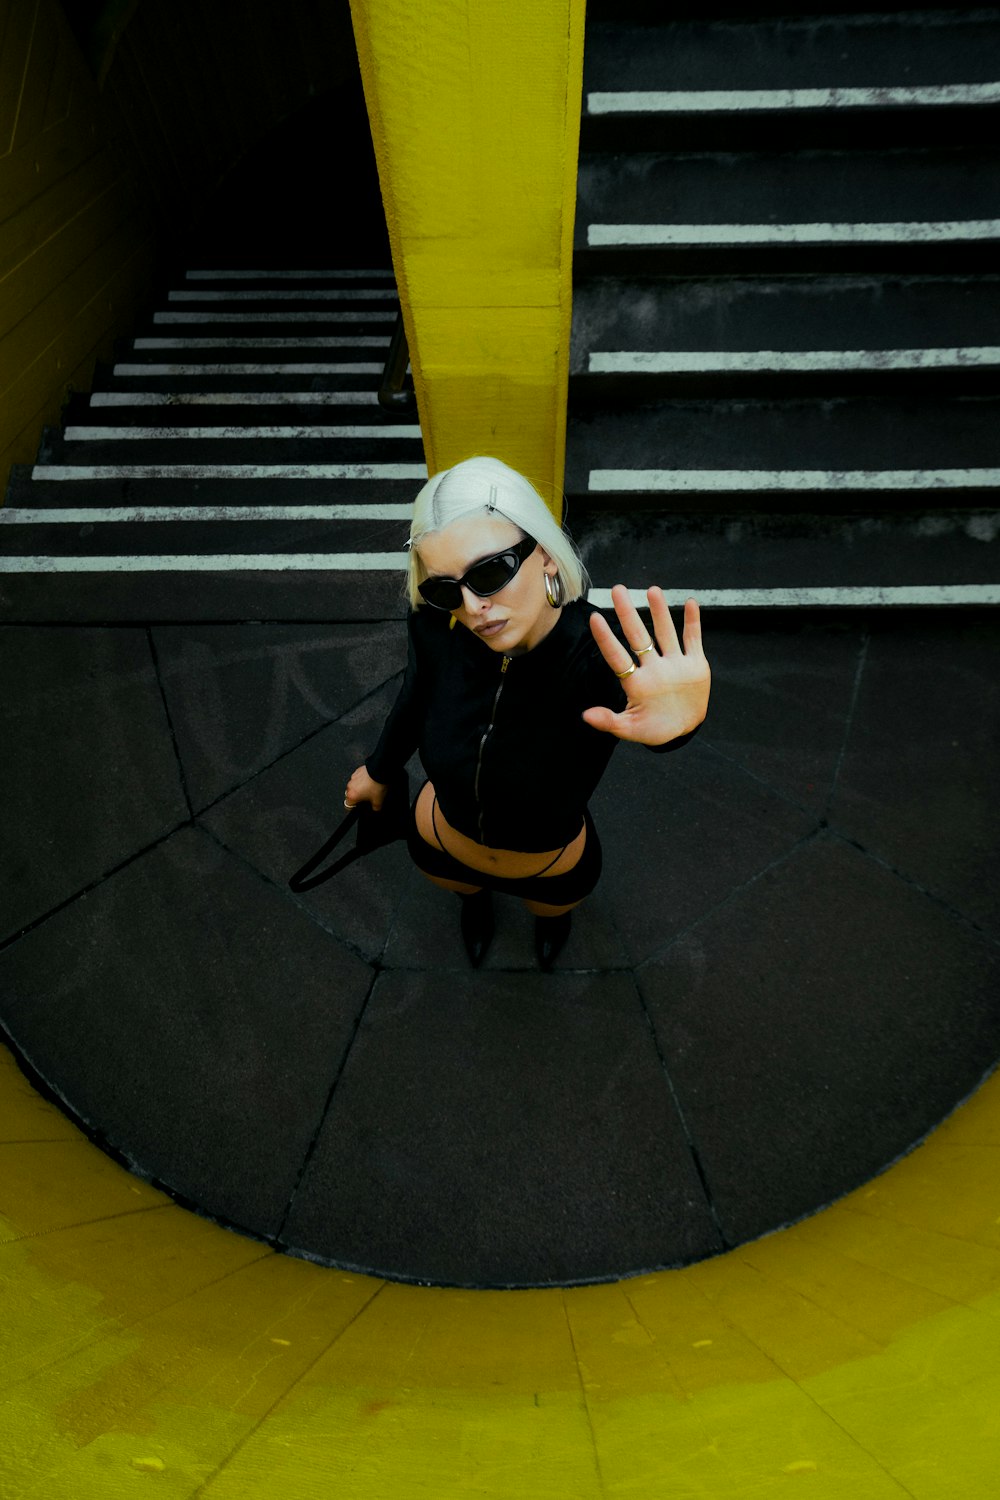 a woman with white hair and sunglasses is standing in front of some stairs